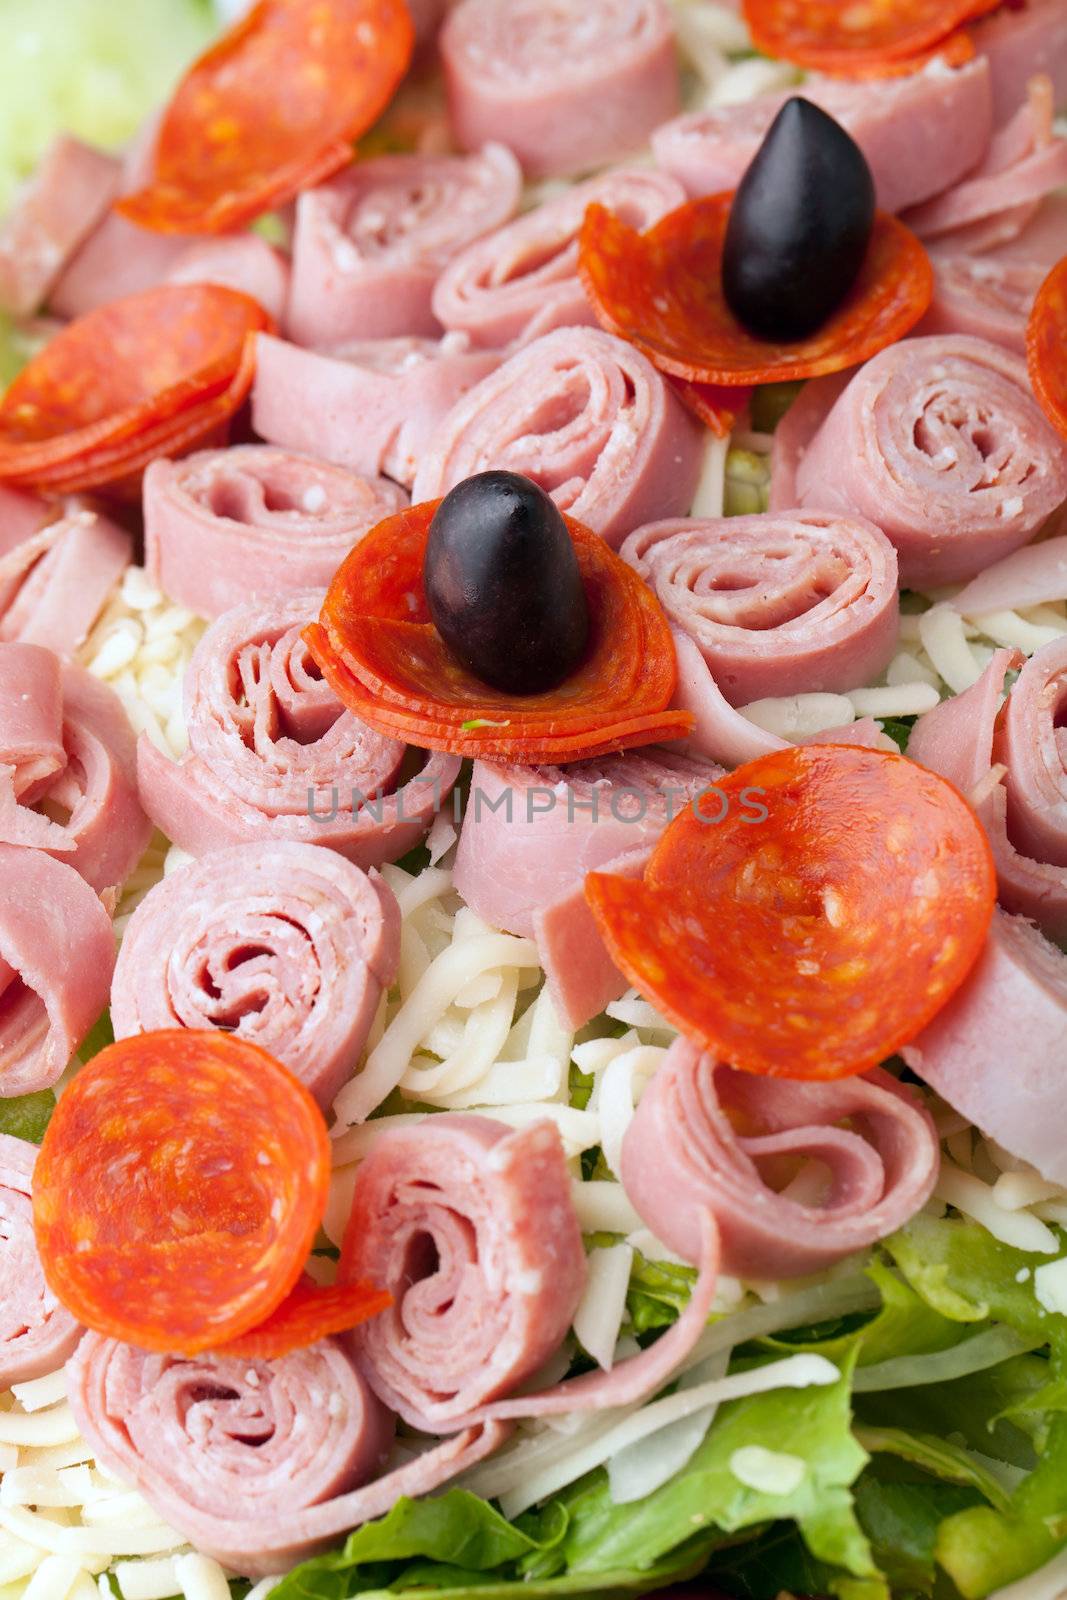 Antipasto Salad Closeup by graficallyminded